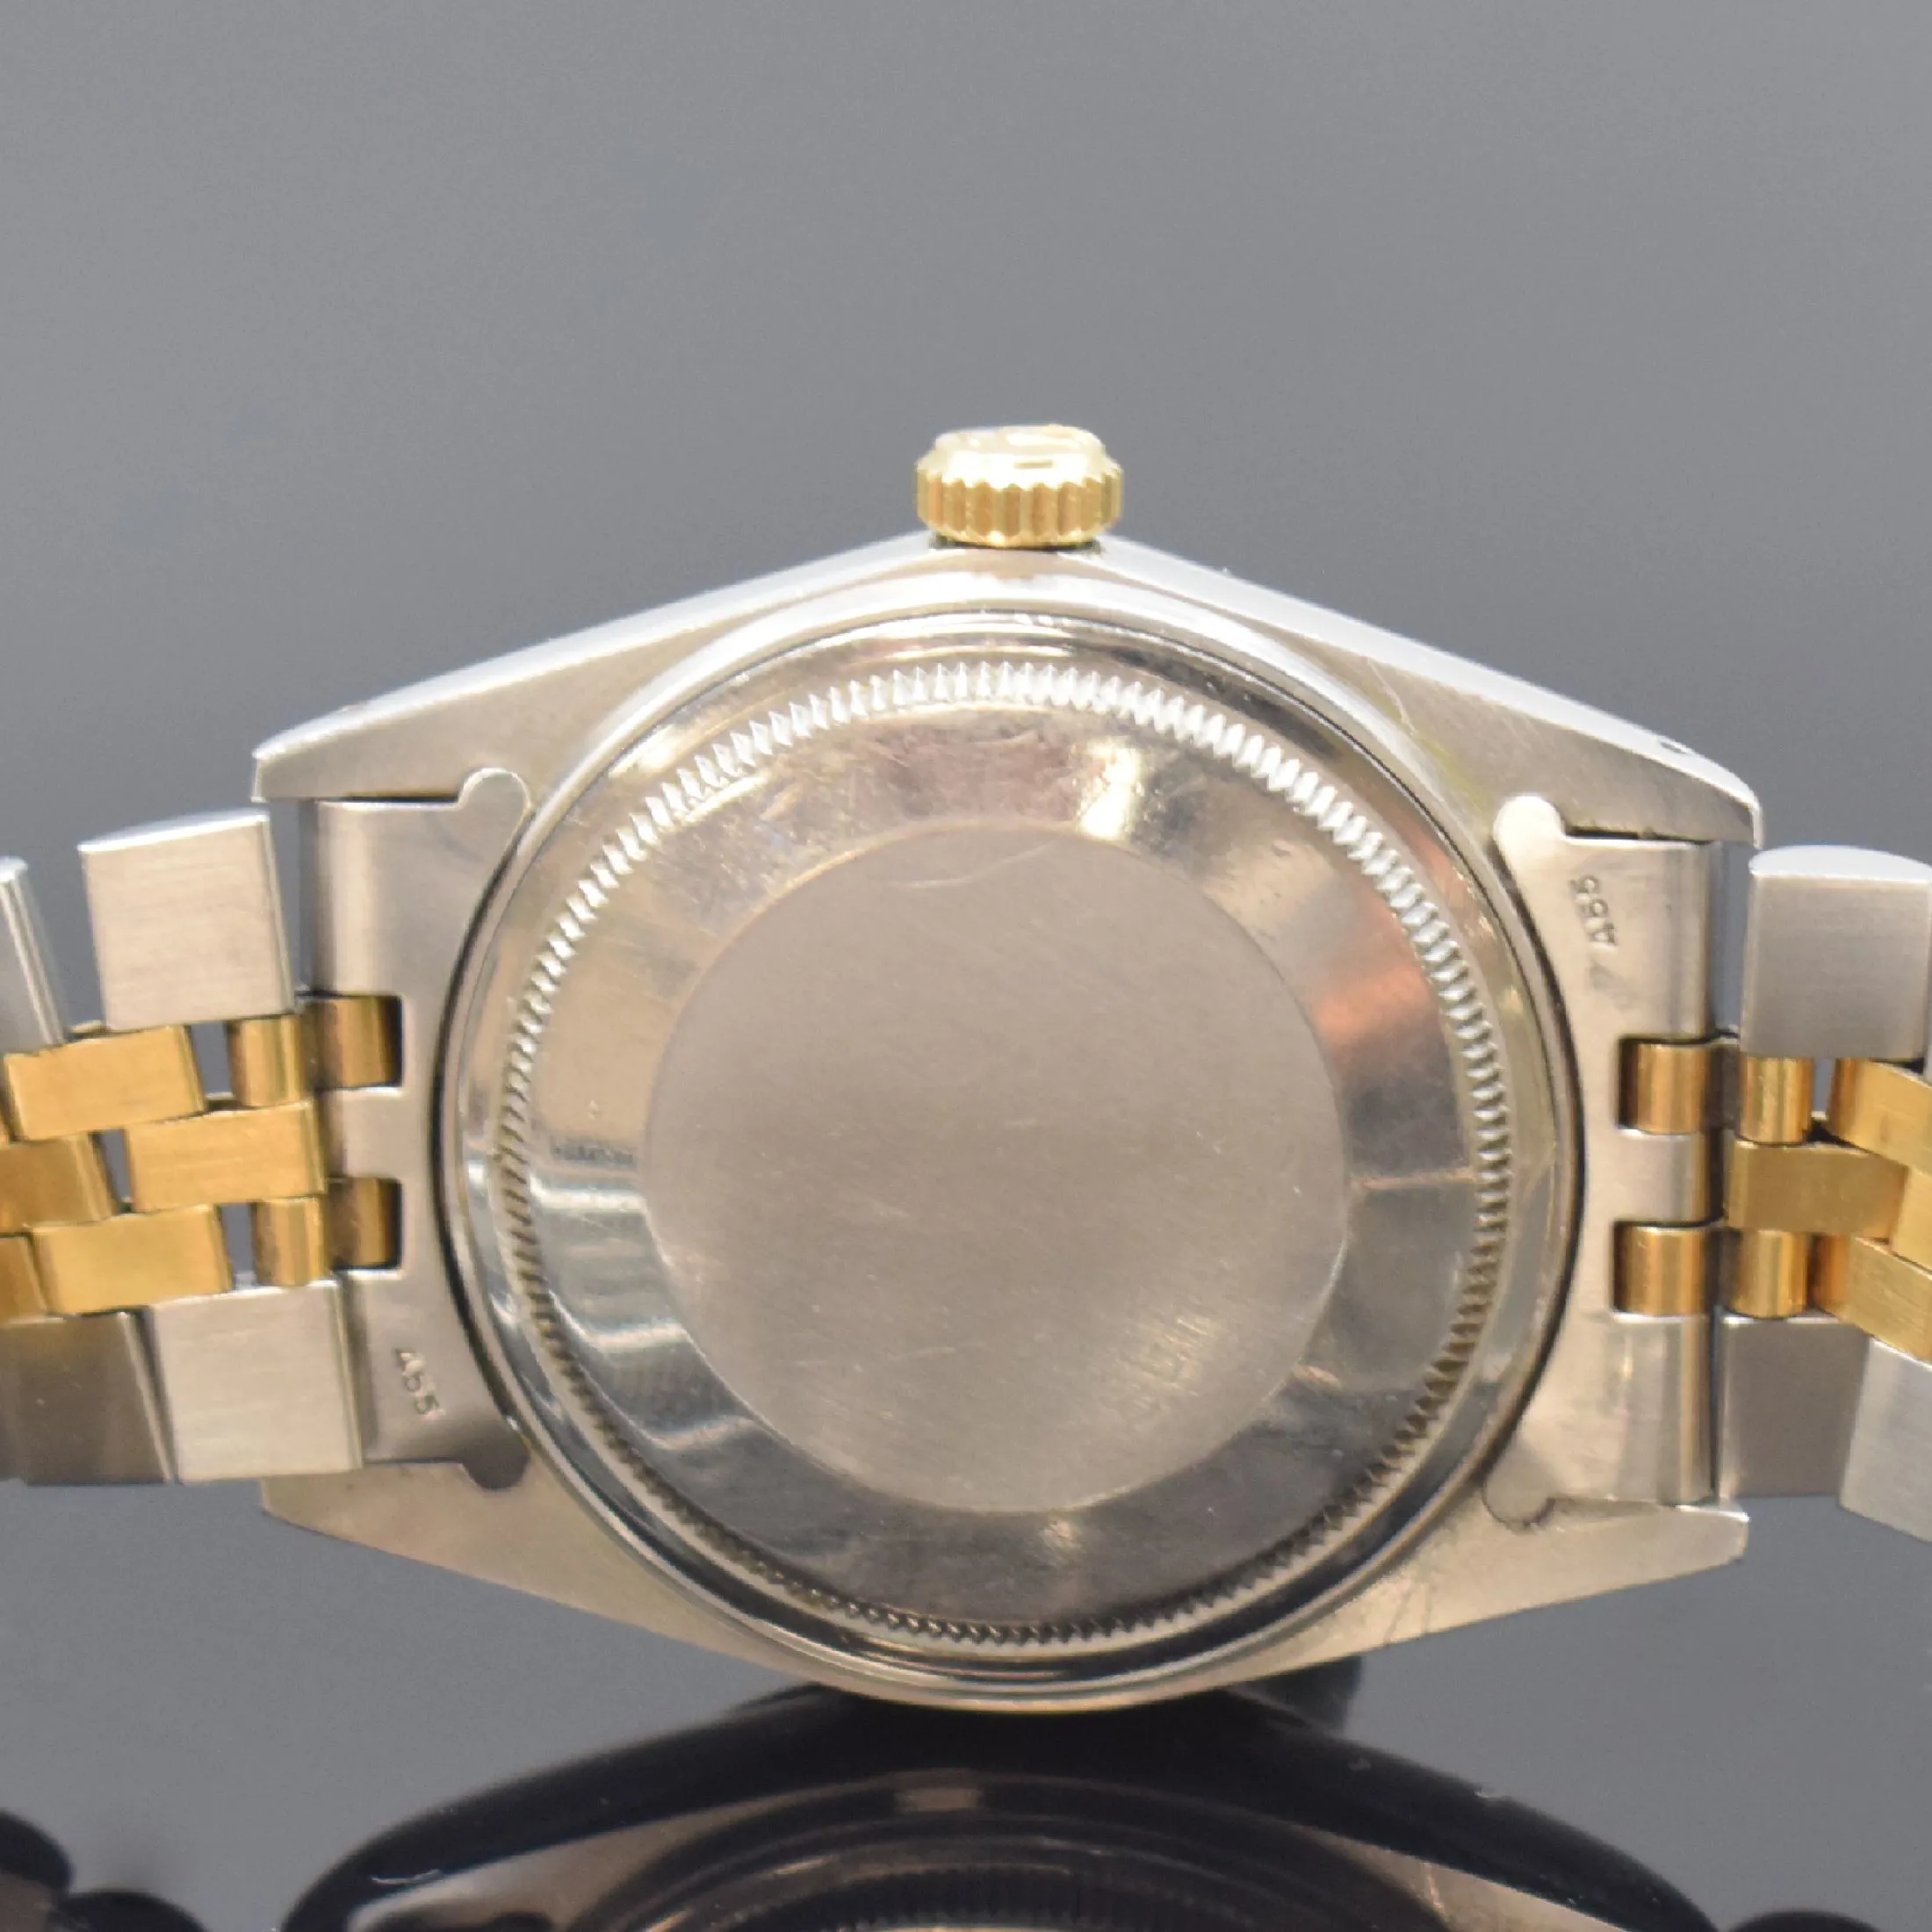 Rolex Datejust 16013 / 16000 36mm Yellow gold and stainless steel Gilt 1